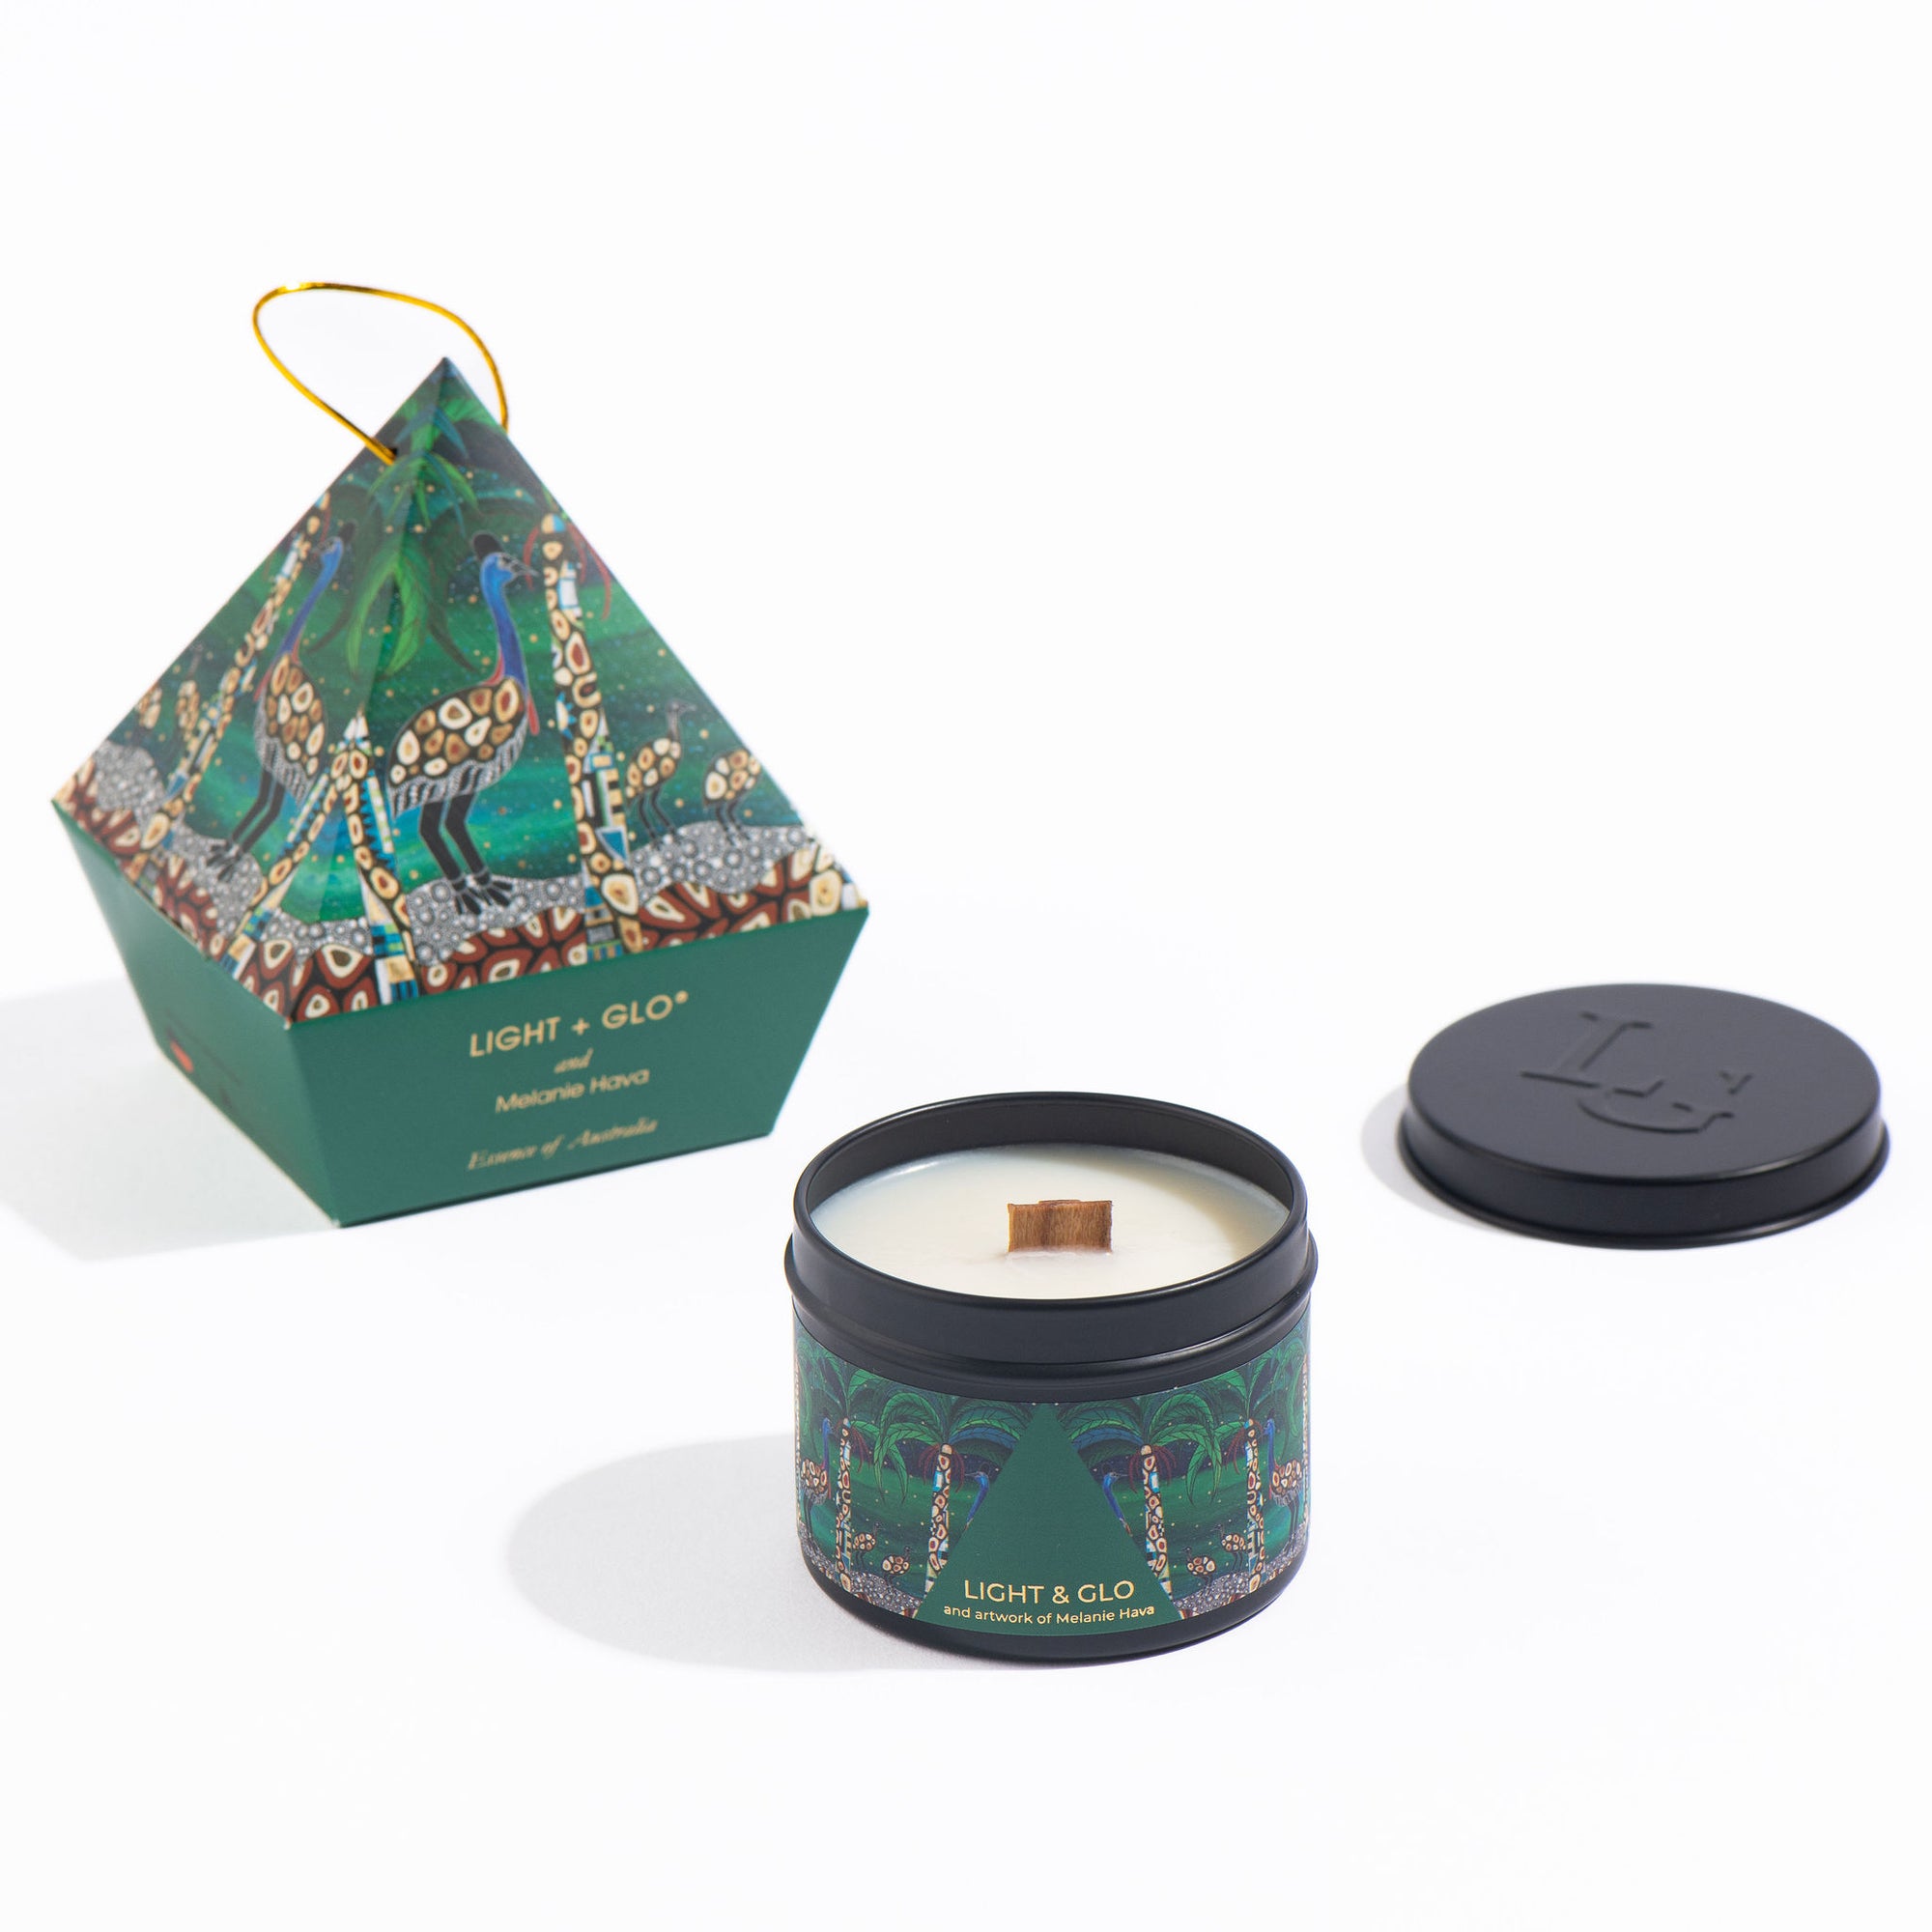 Soul Australiana Travel Candle - Essence of Australia Bauble Limited Edition Candle | Luxury Candles & Home Fragrances by Light + Glo